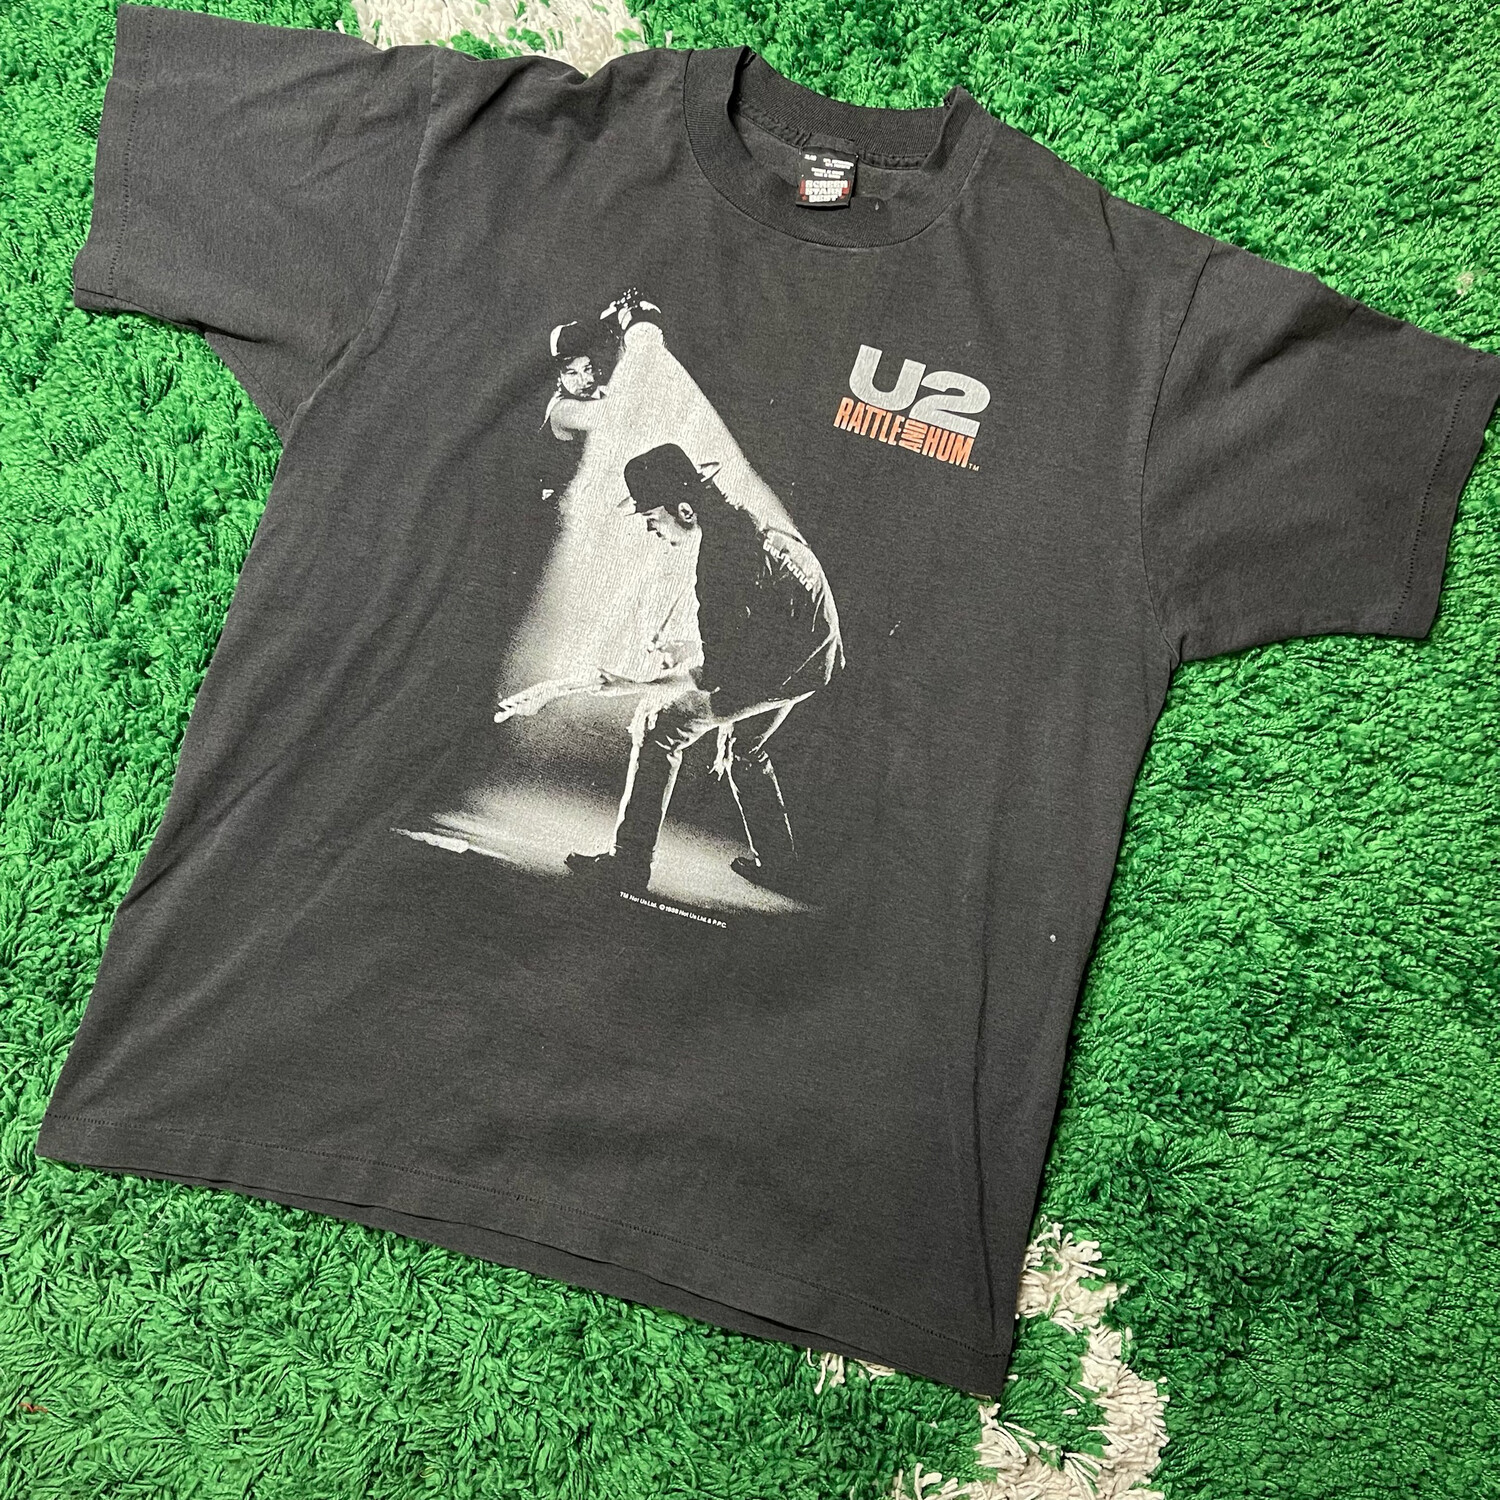 U2 Rattle And Hum Tee Size XL